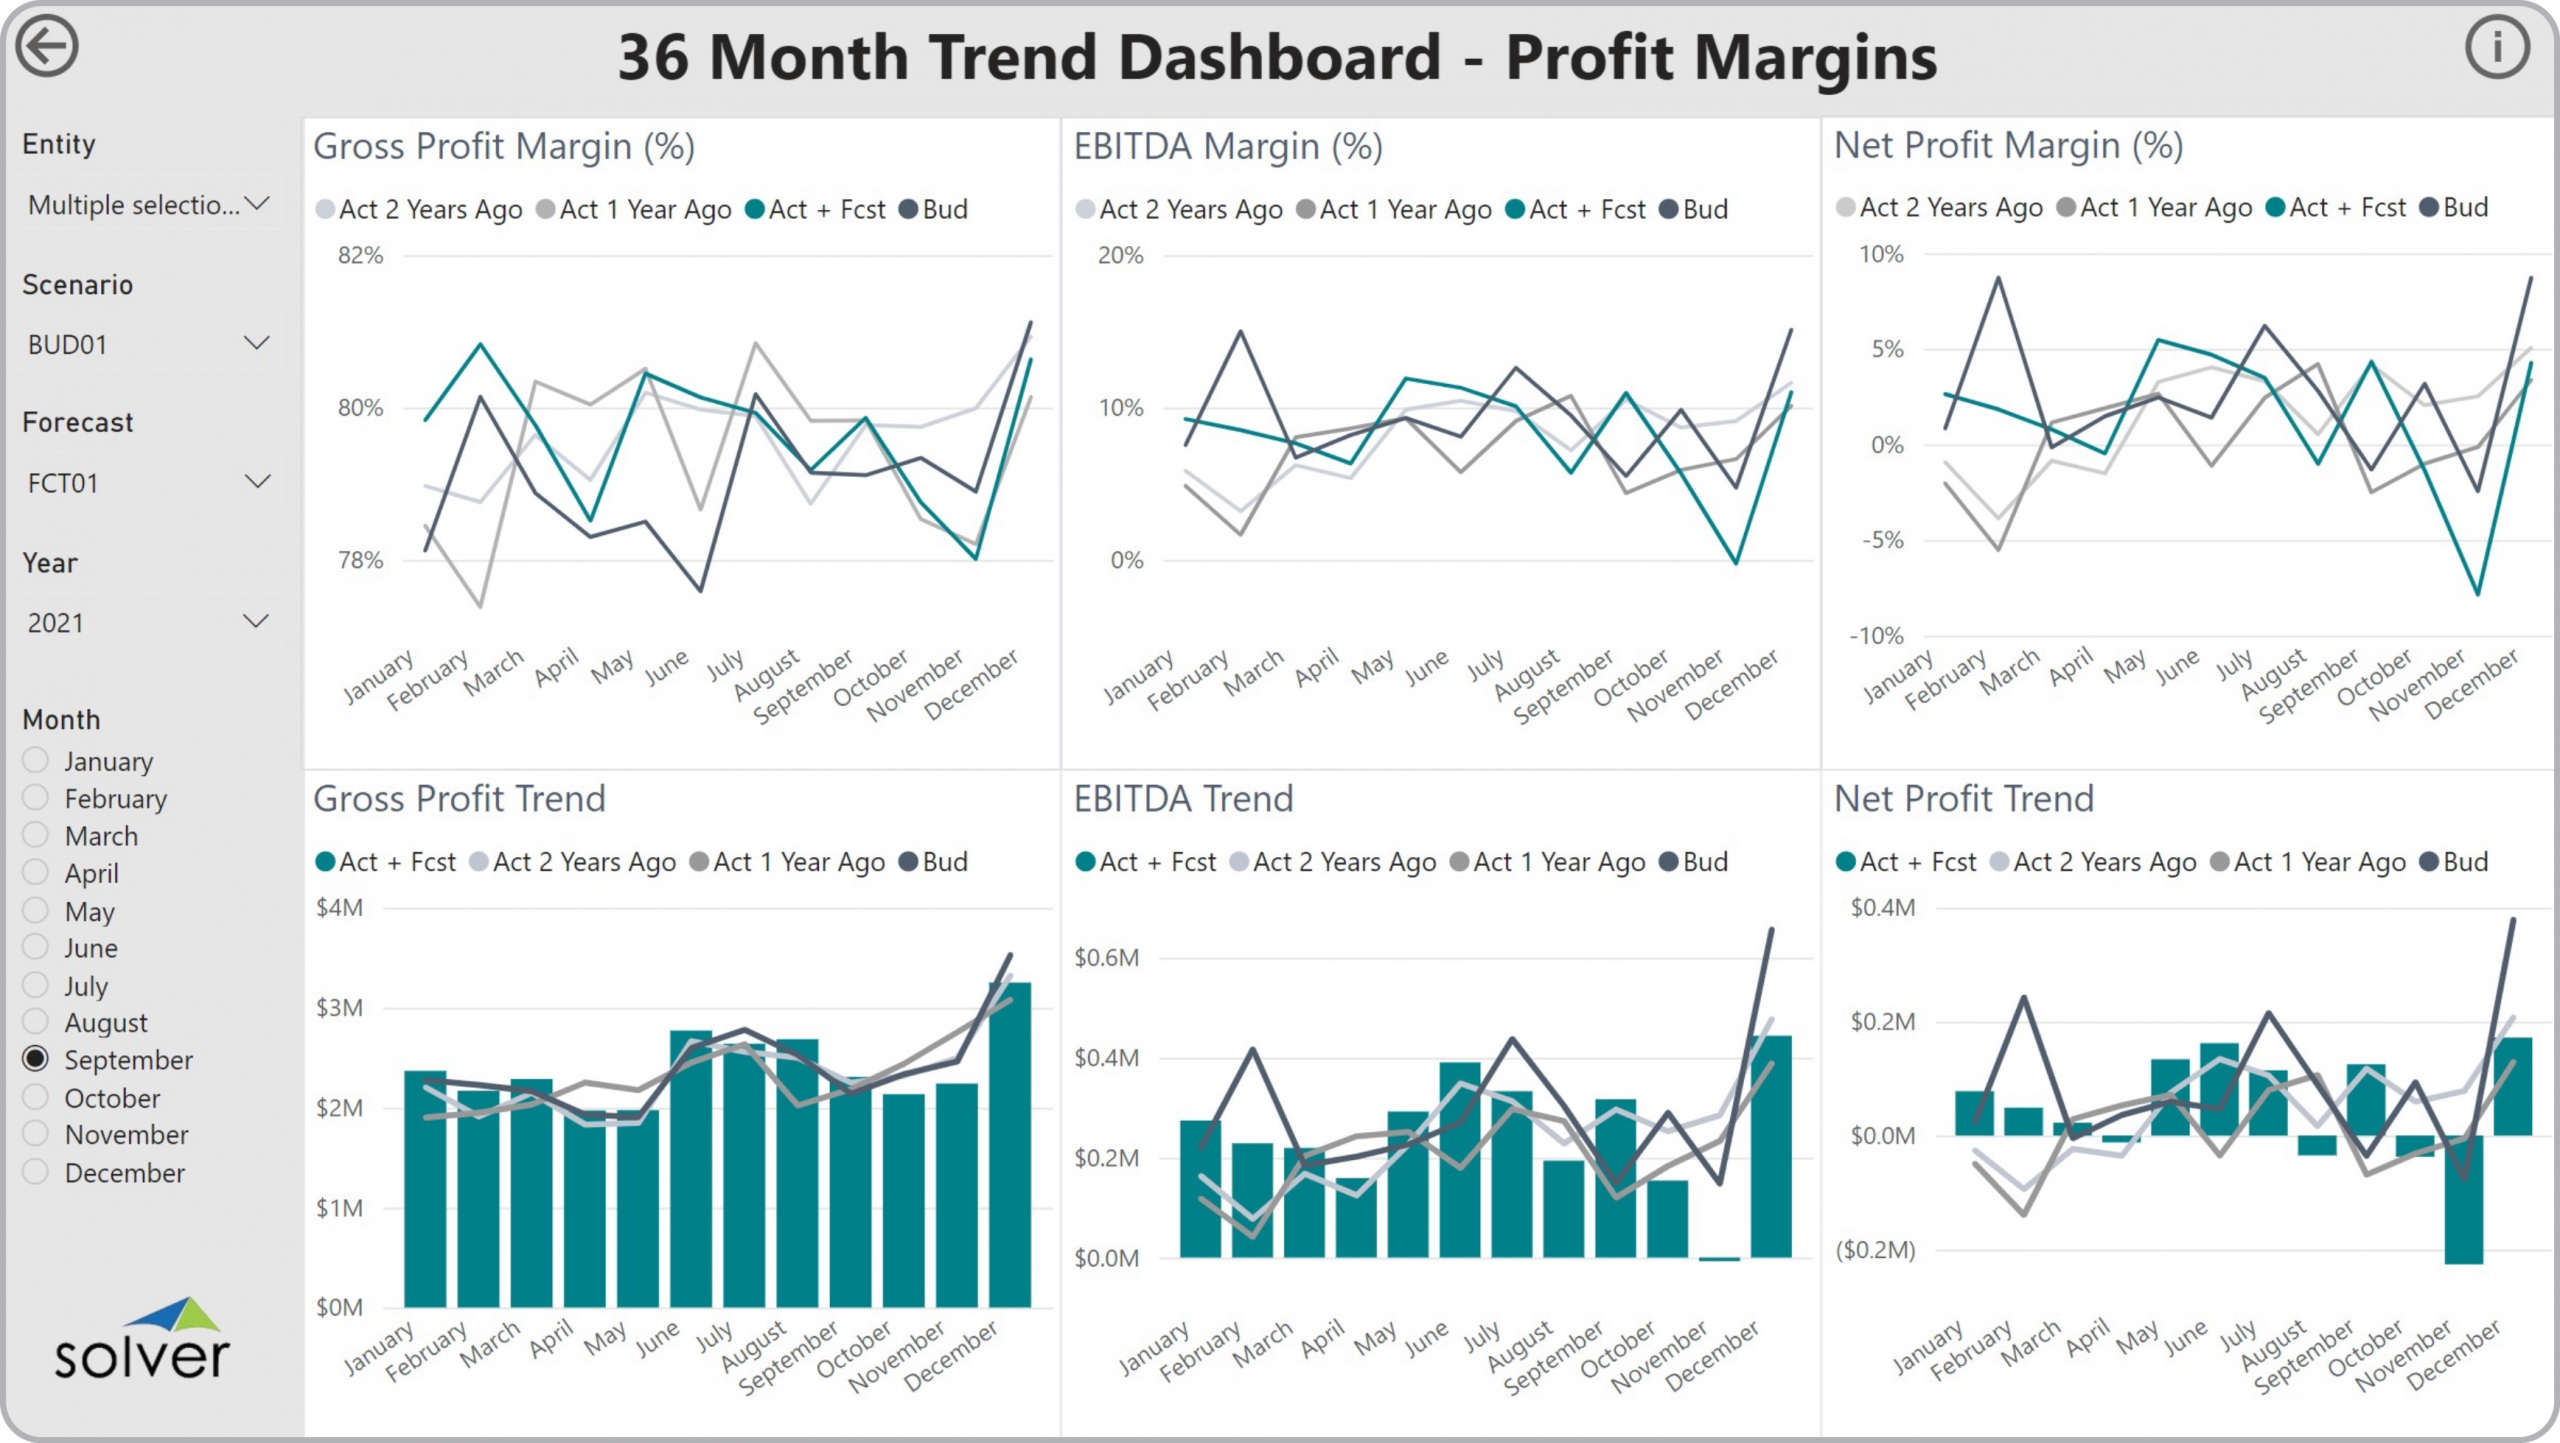 Example of a 36 Month Profitability Trend Dashboard to Streamline the Monthly Reporting Process